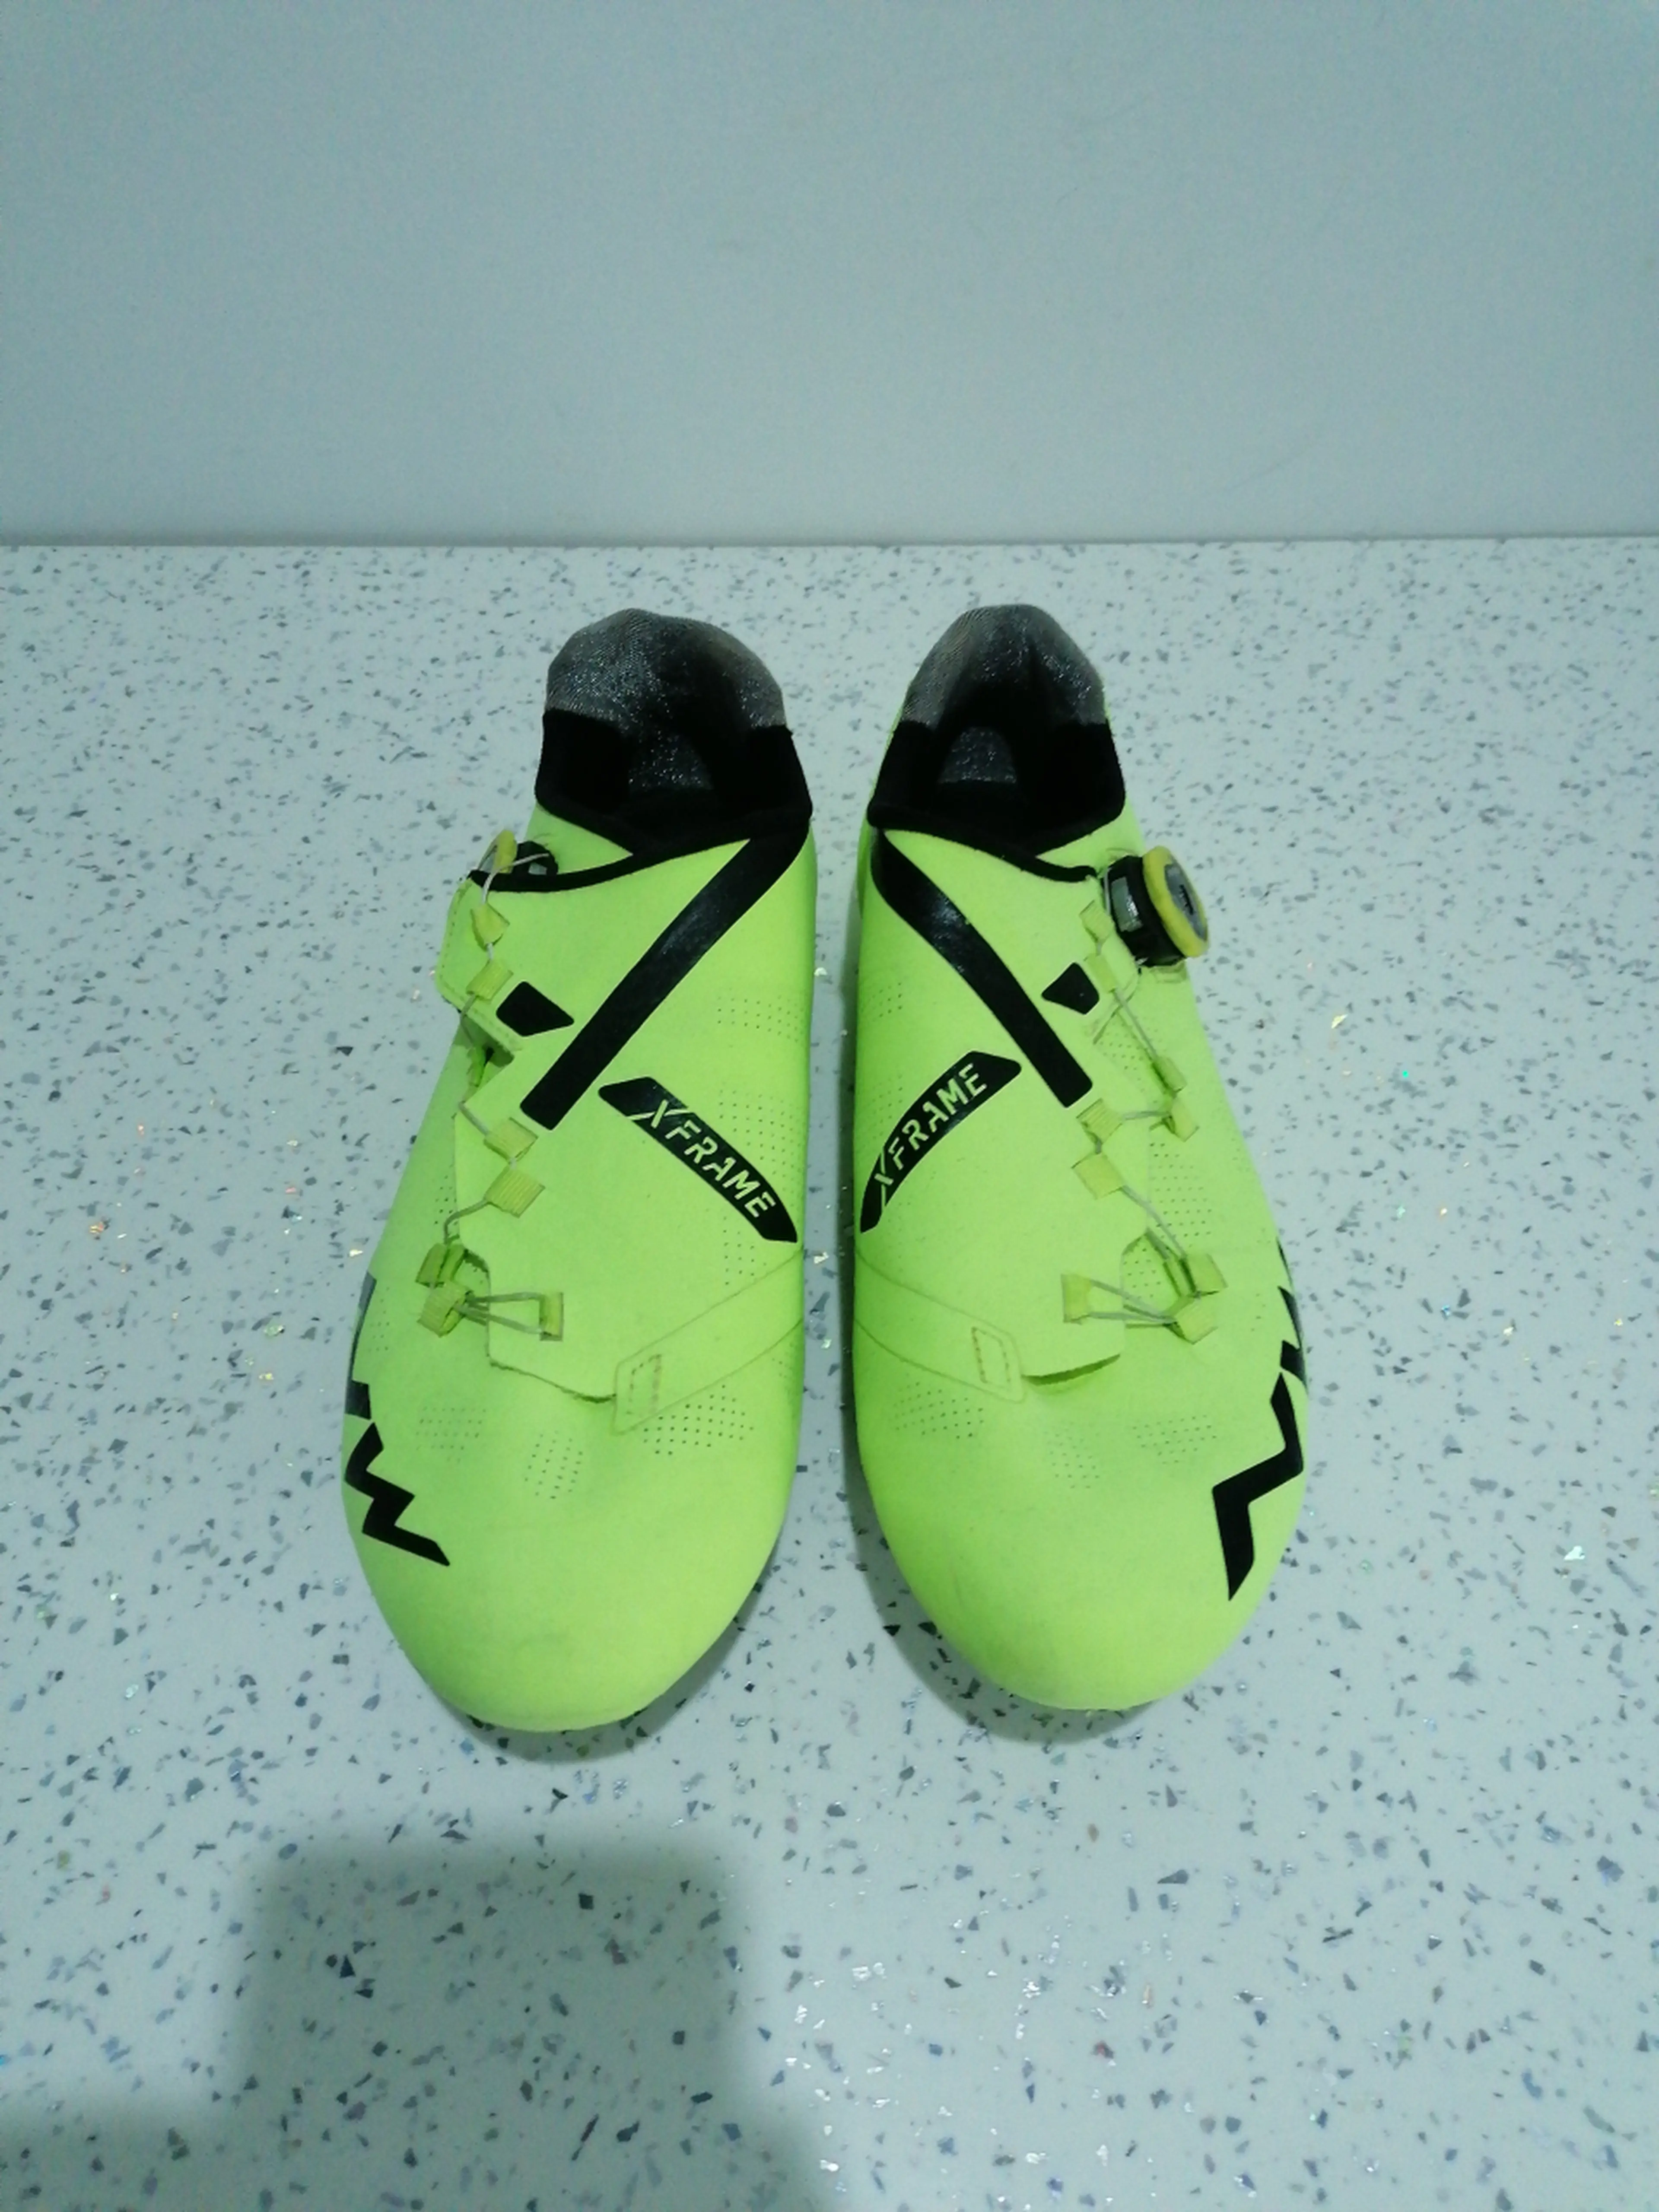 3. Northwave Extreme RR size 42